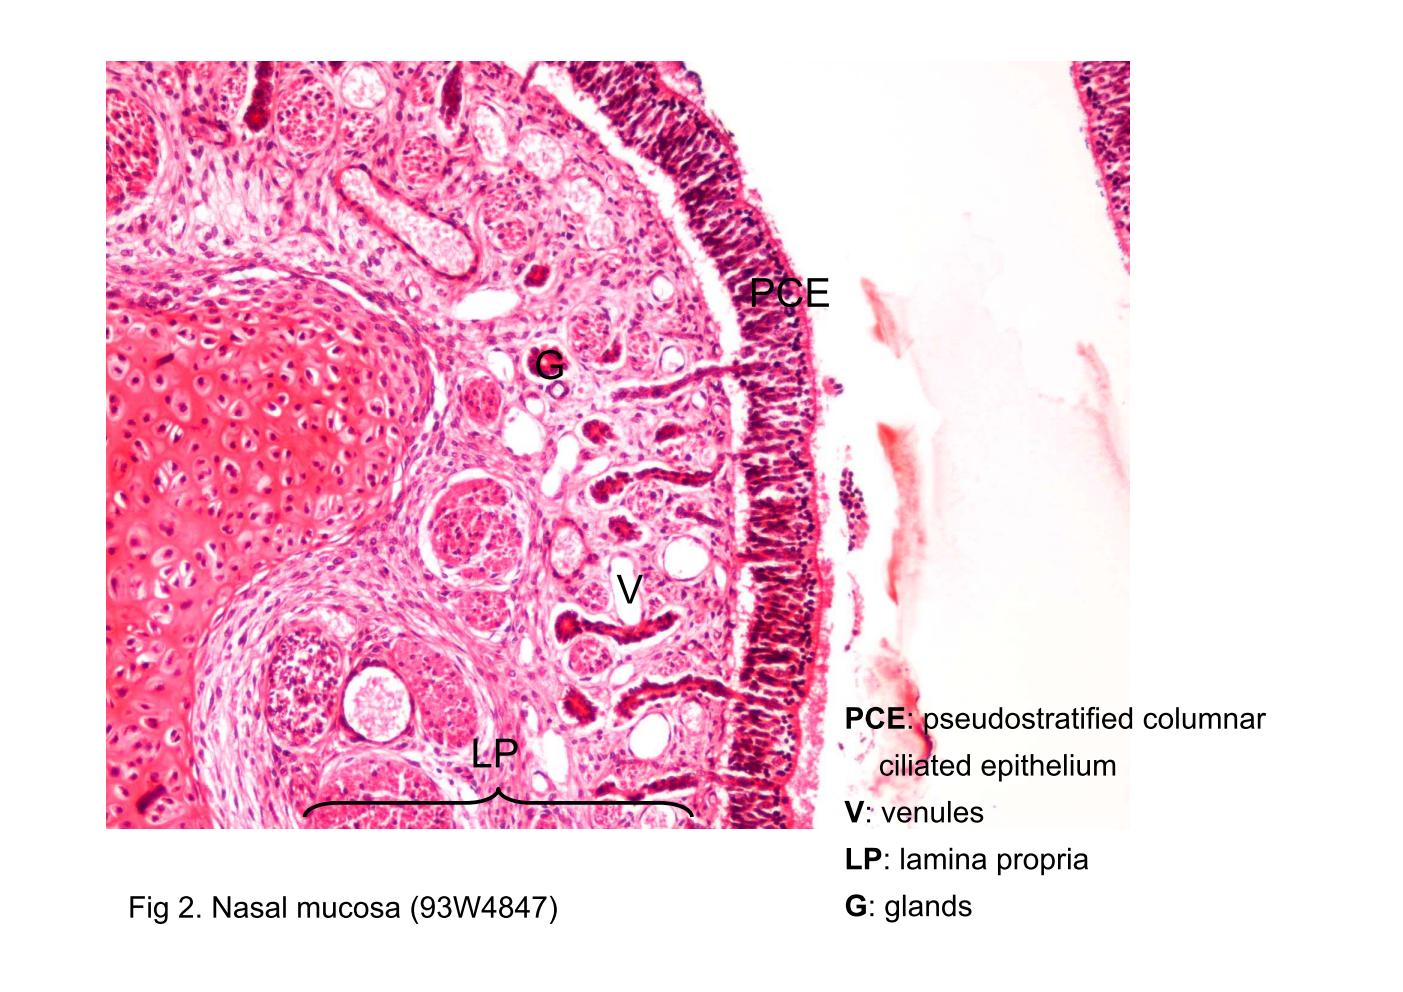 block9_07.jpg - Fig 2. Nasal mucosa (93W4847)The respiratory mucosa consists of a pseudostratified columnar ciliated epithelium (PCE) supported by a richly vascular (V) lamina propria (LP) containing mixed glands (G).